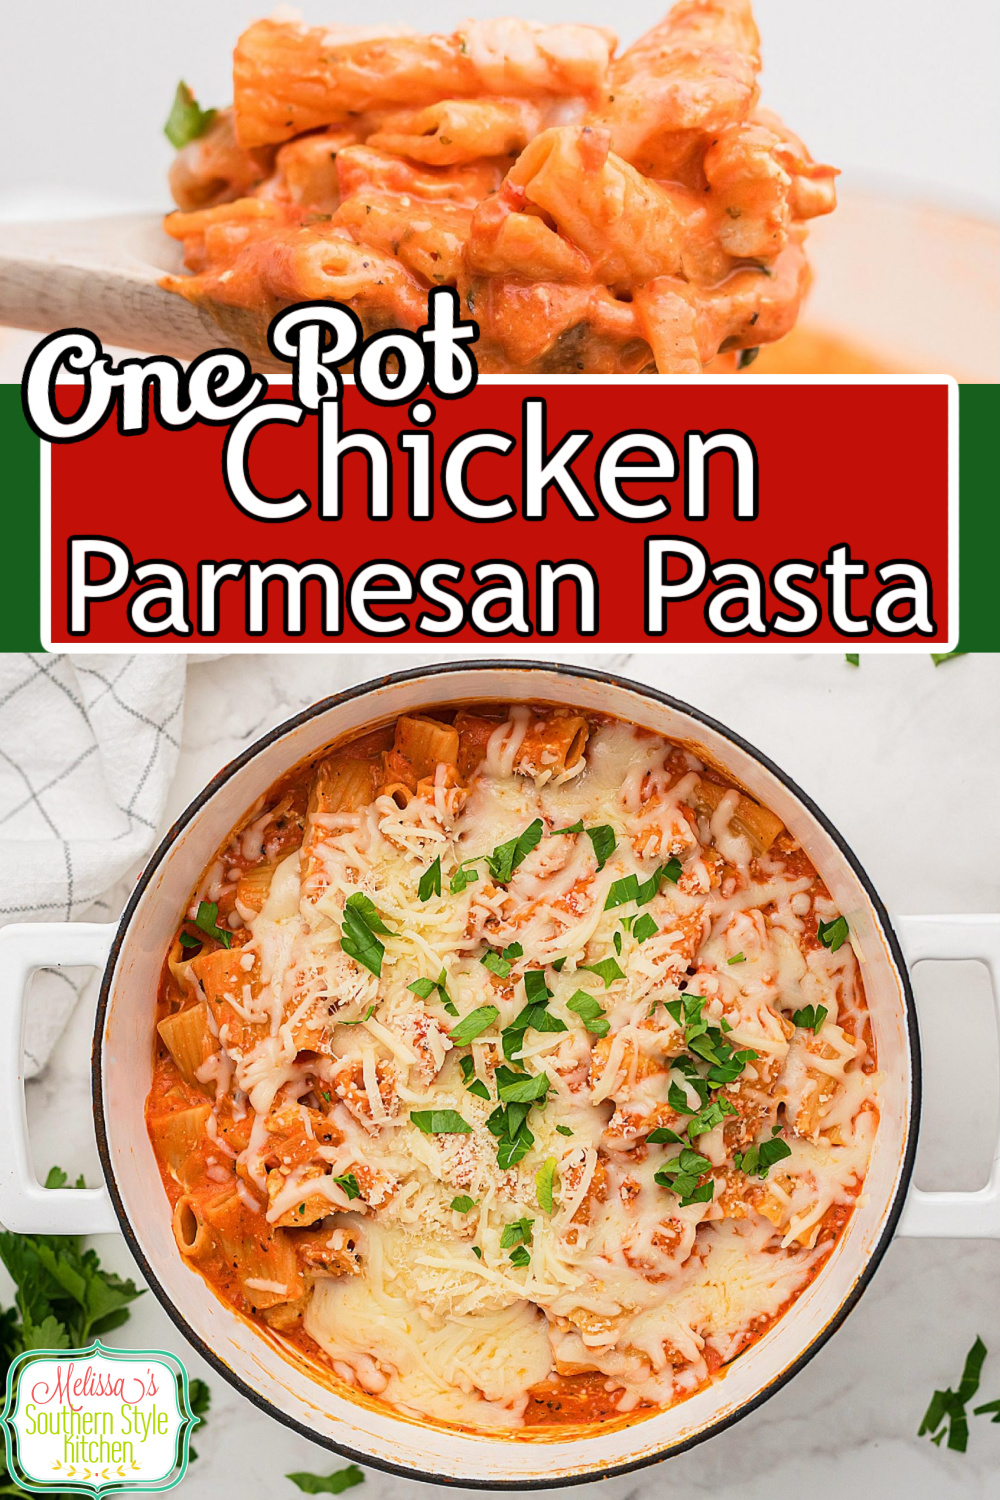 Enjoy this mouthwatering One Pot Creamy Chicken Parmesan Pasta for Italian night at home #chickenparmesan #onepotpasta #chickenparmesanpasta #easychickenrecipes #pasta #onepotrecipes #dinnerideas #southernrecipes #chickenbreastrecipes via @melissasssk